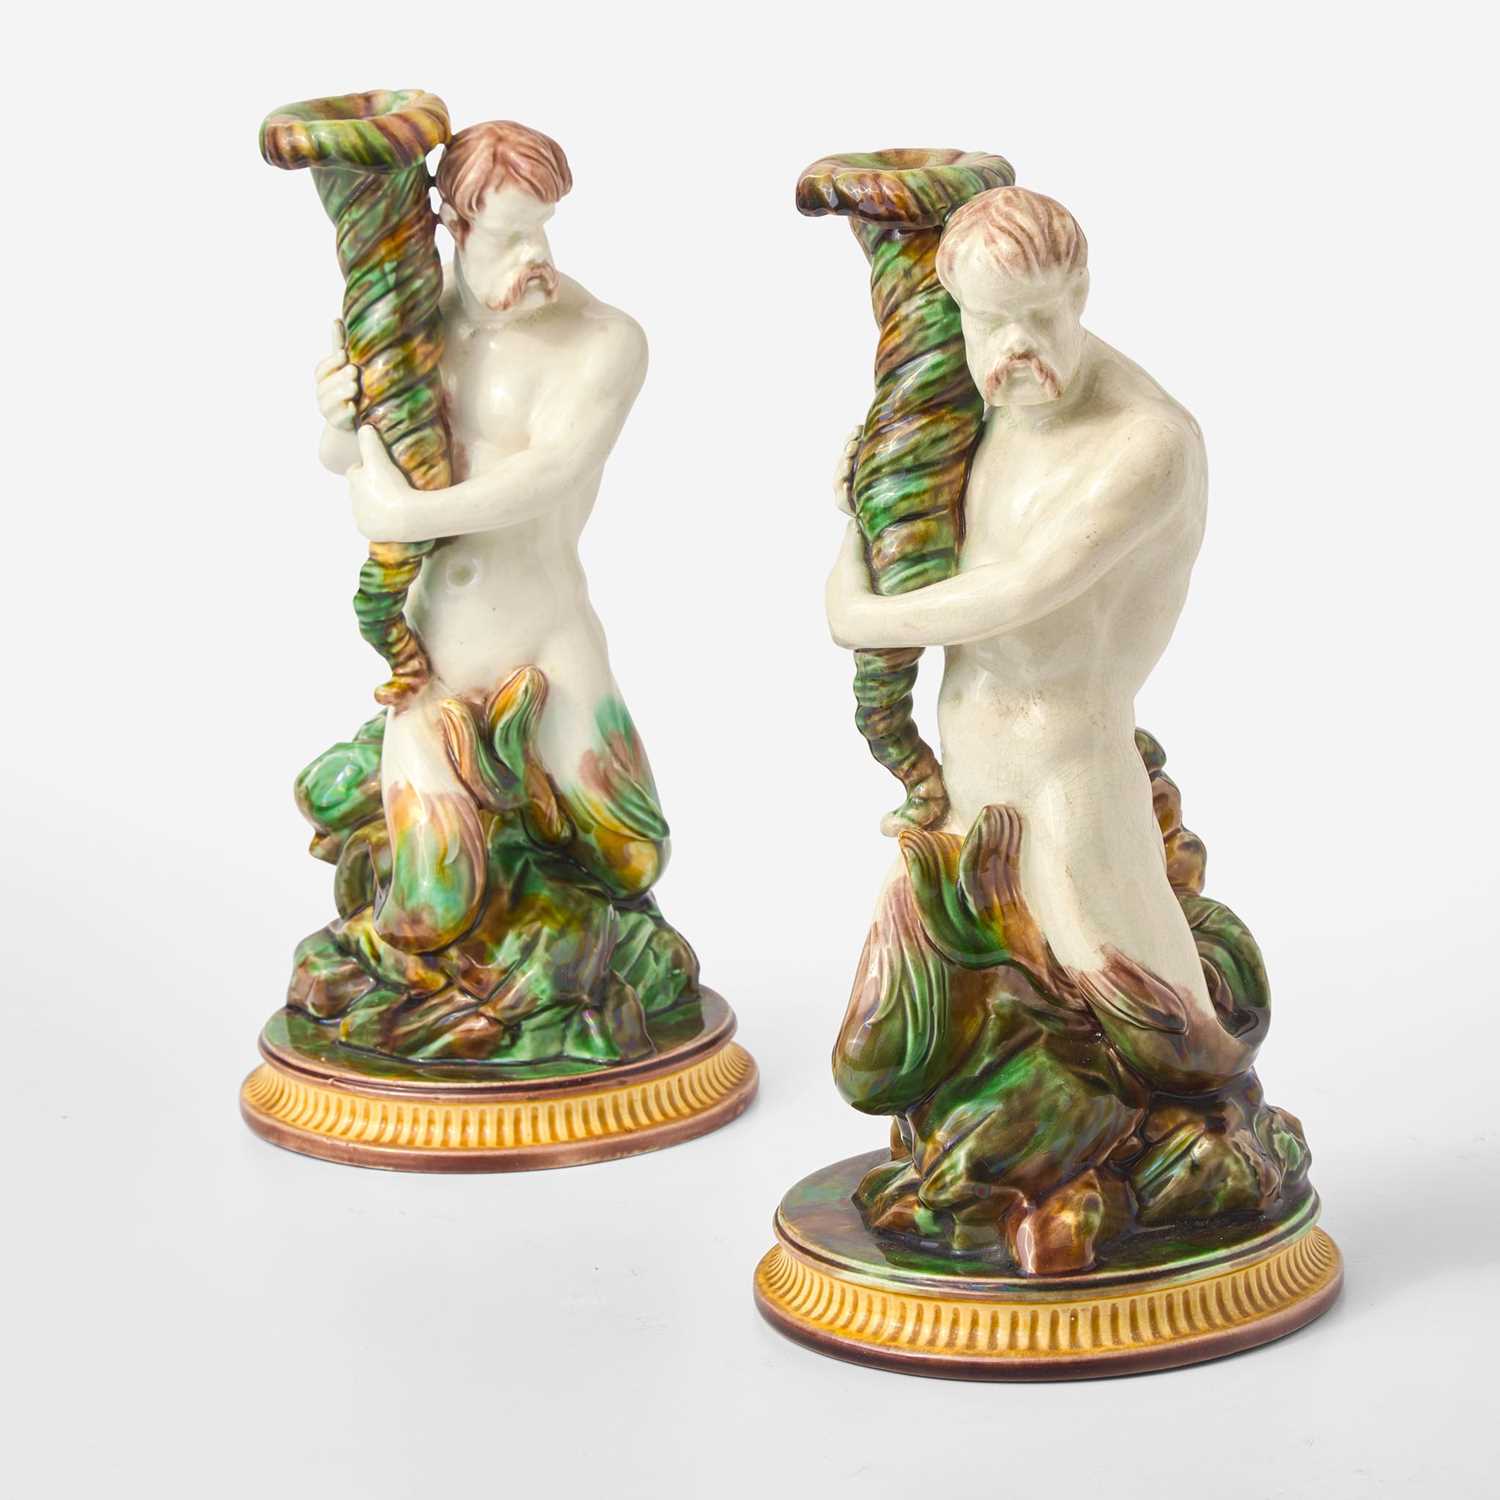 Lot 108 - An Assembled Pair of Wedgwood Majolica Assembled Triton Candle Holders